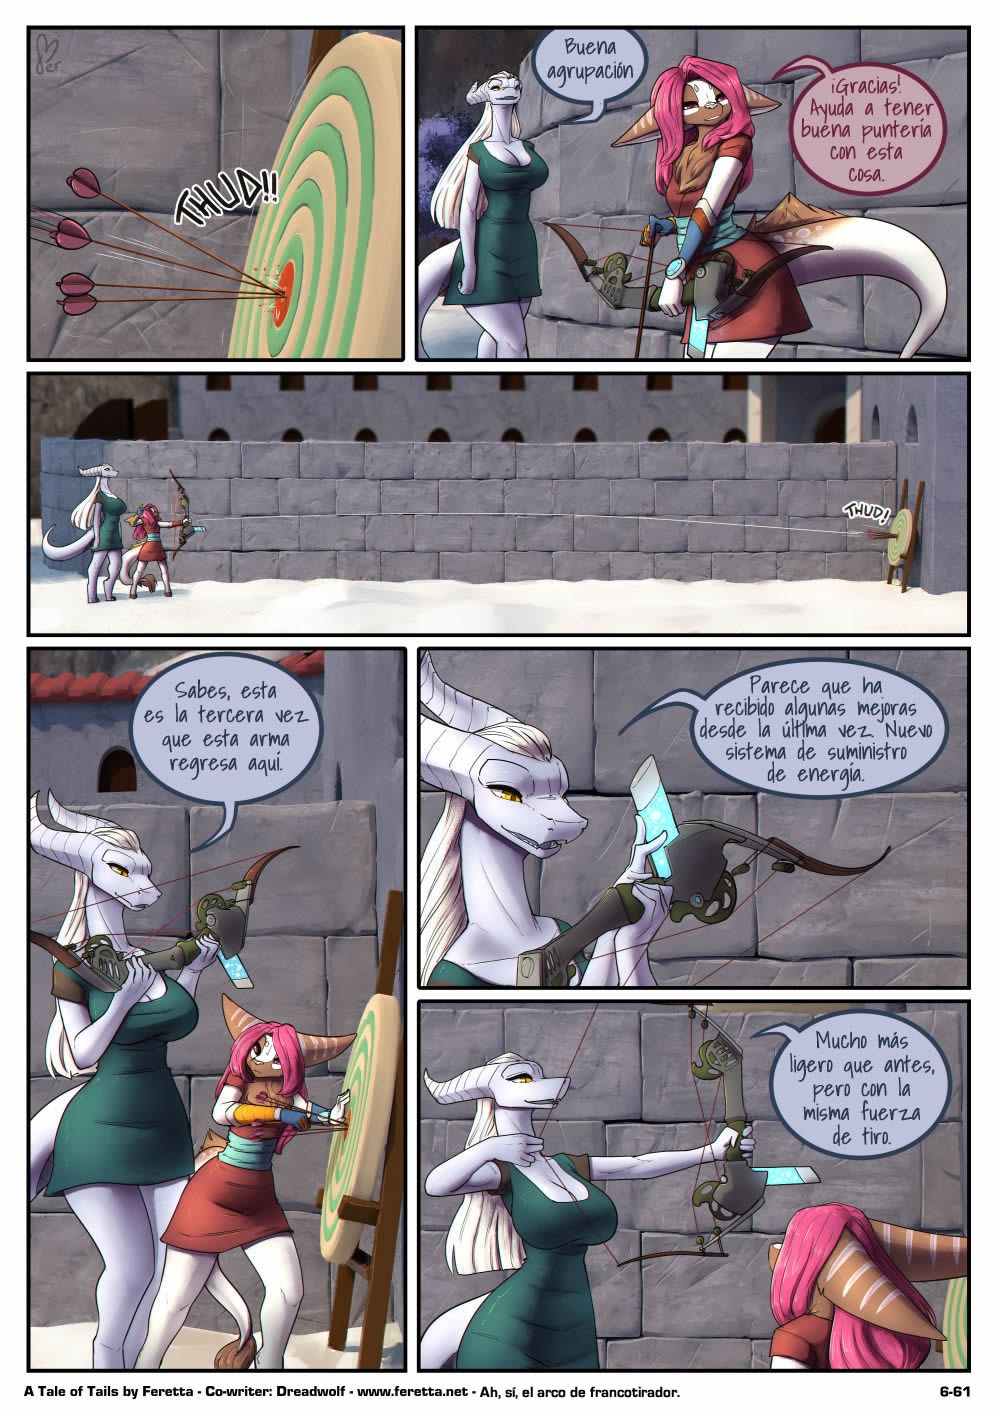 [Feretta] A Tale of Tails: Chapter 6 - Paths converge / Los caminos convergen [Spanish] [Red Fox Makkan] 61